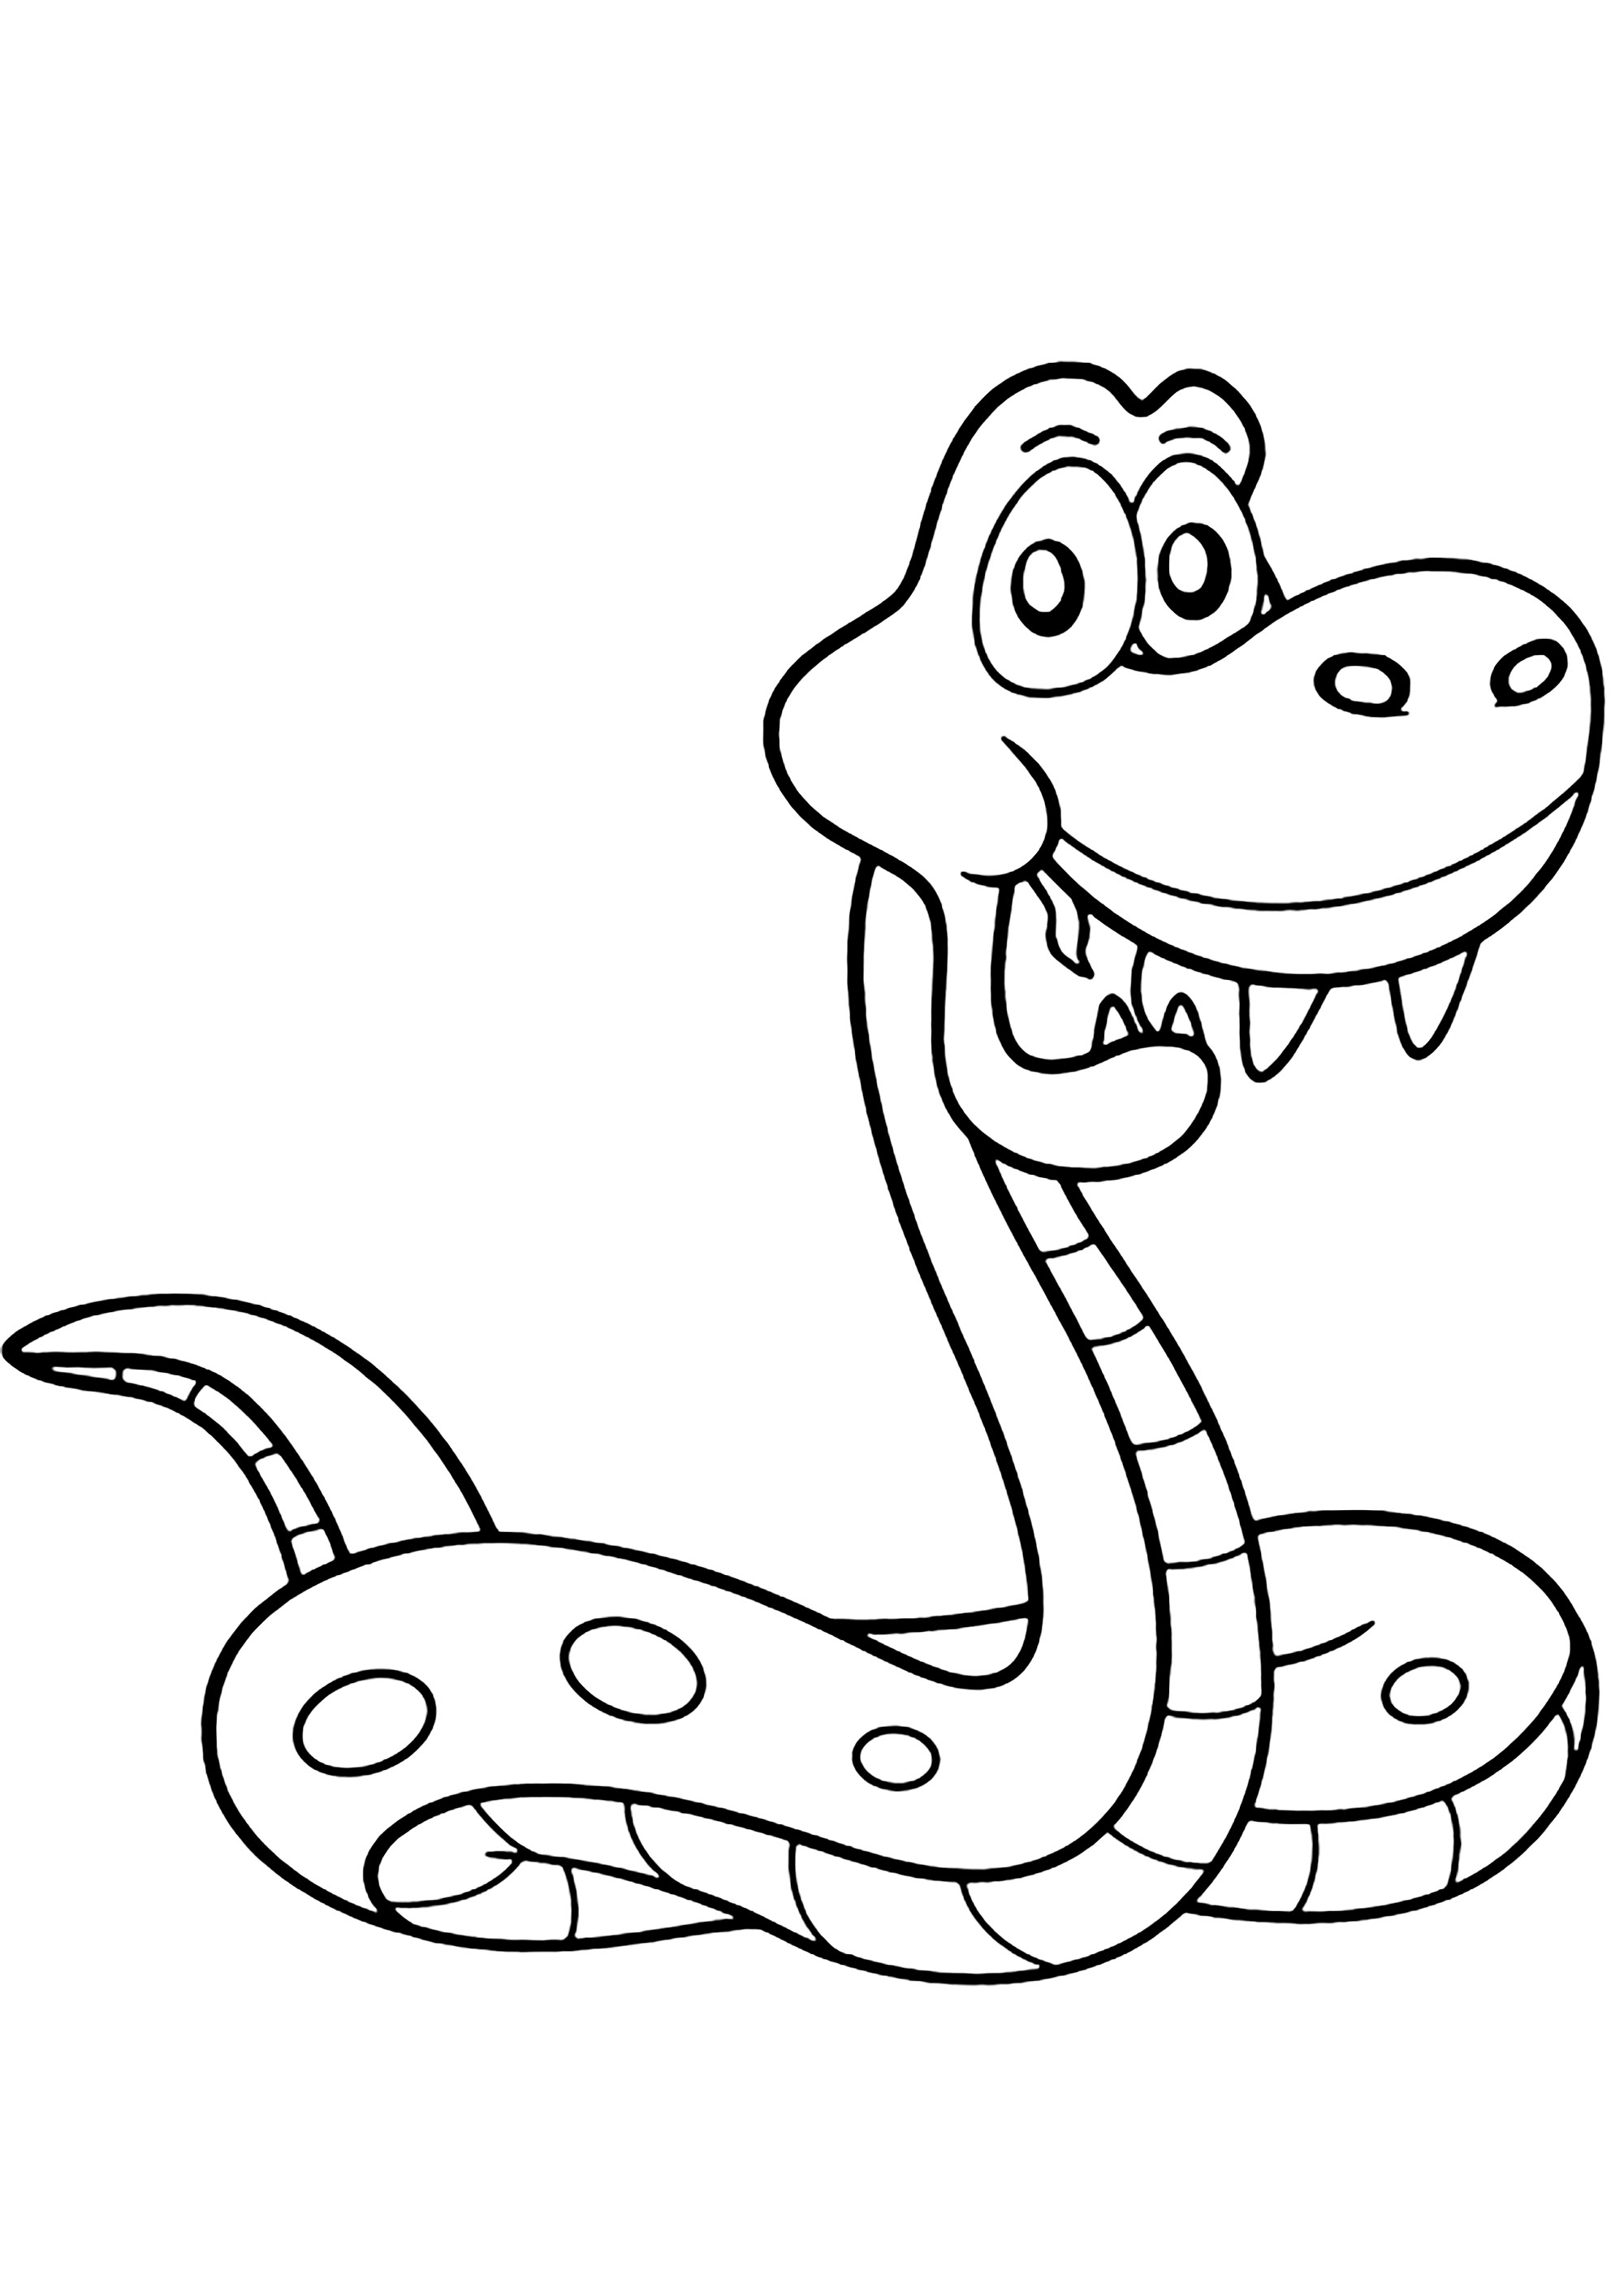 Simple drawing of a snake to color - Snakes Kids Coloring Pages